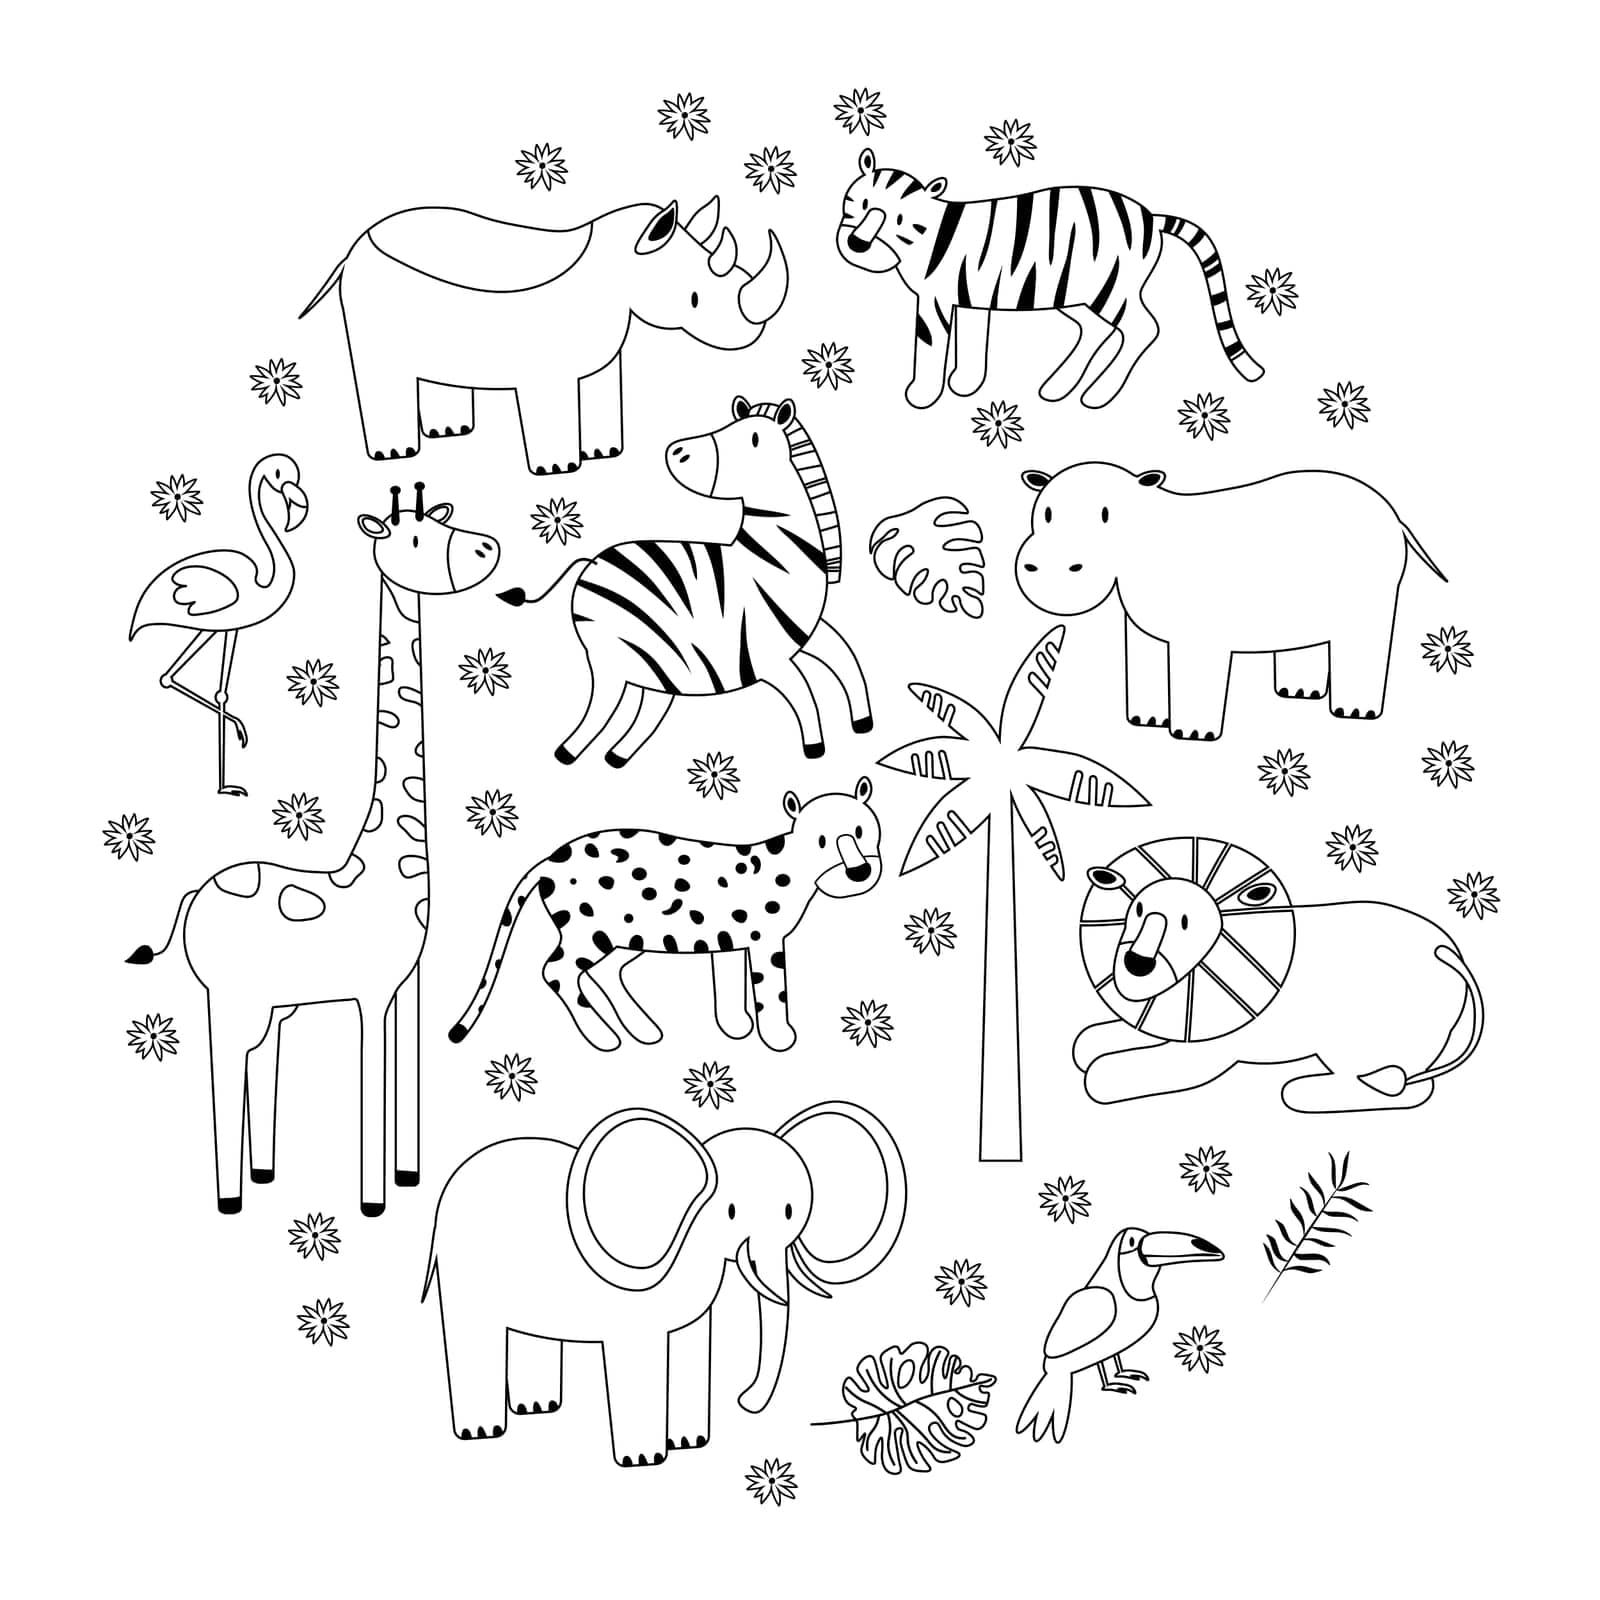 Cartoon animals creatures set African Black and white graphic vector illustration in the line style circle background EPS by Alxyzt